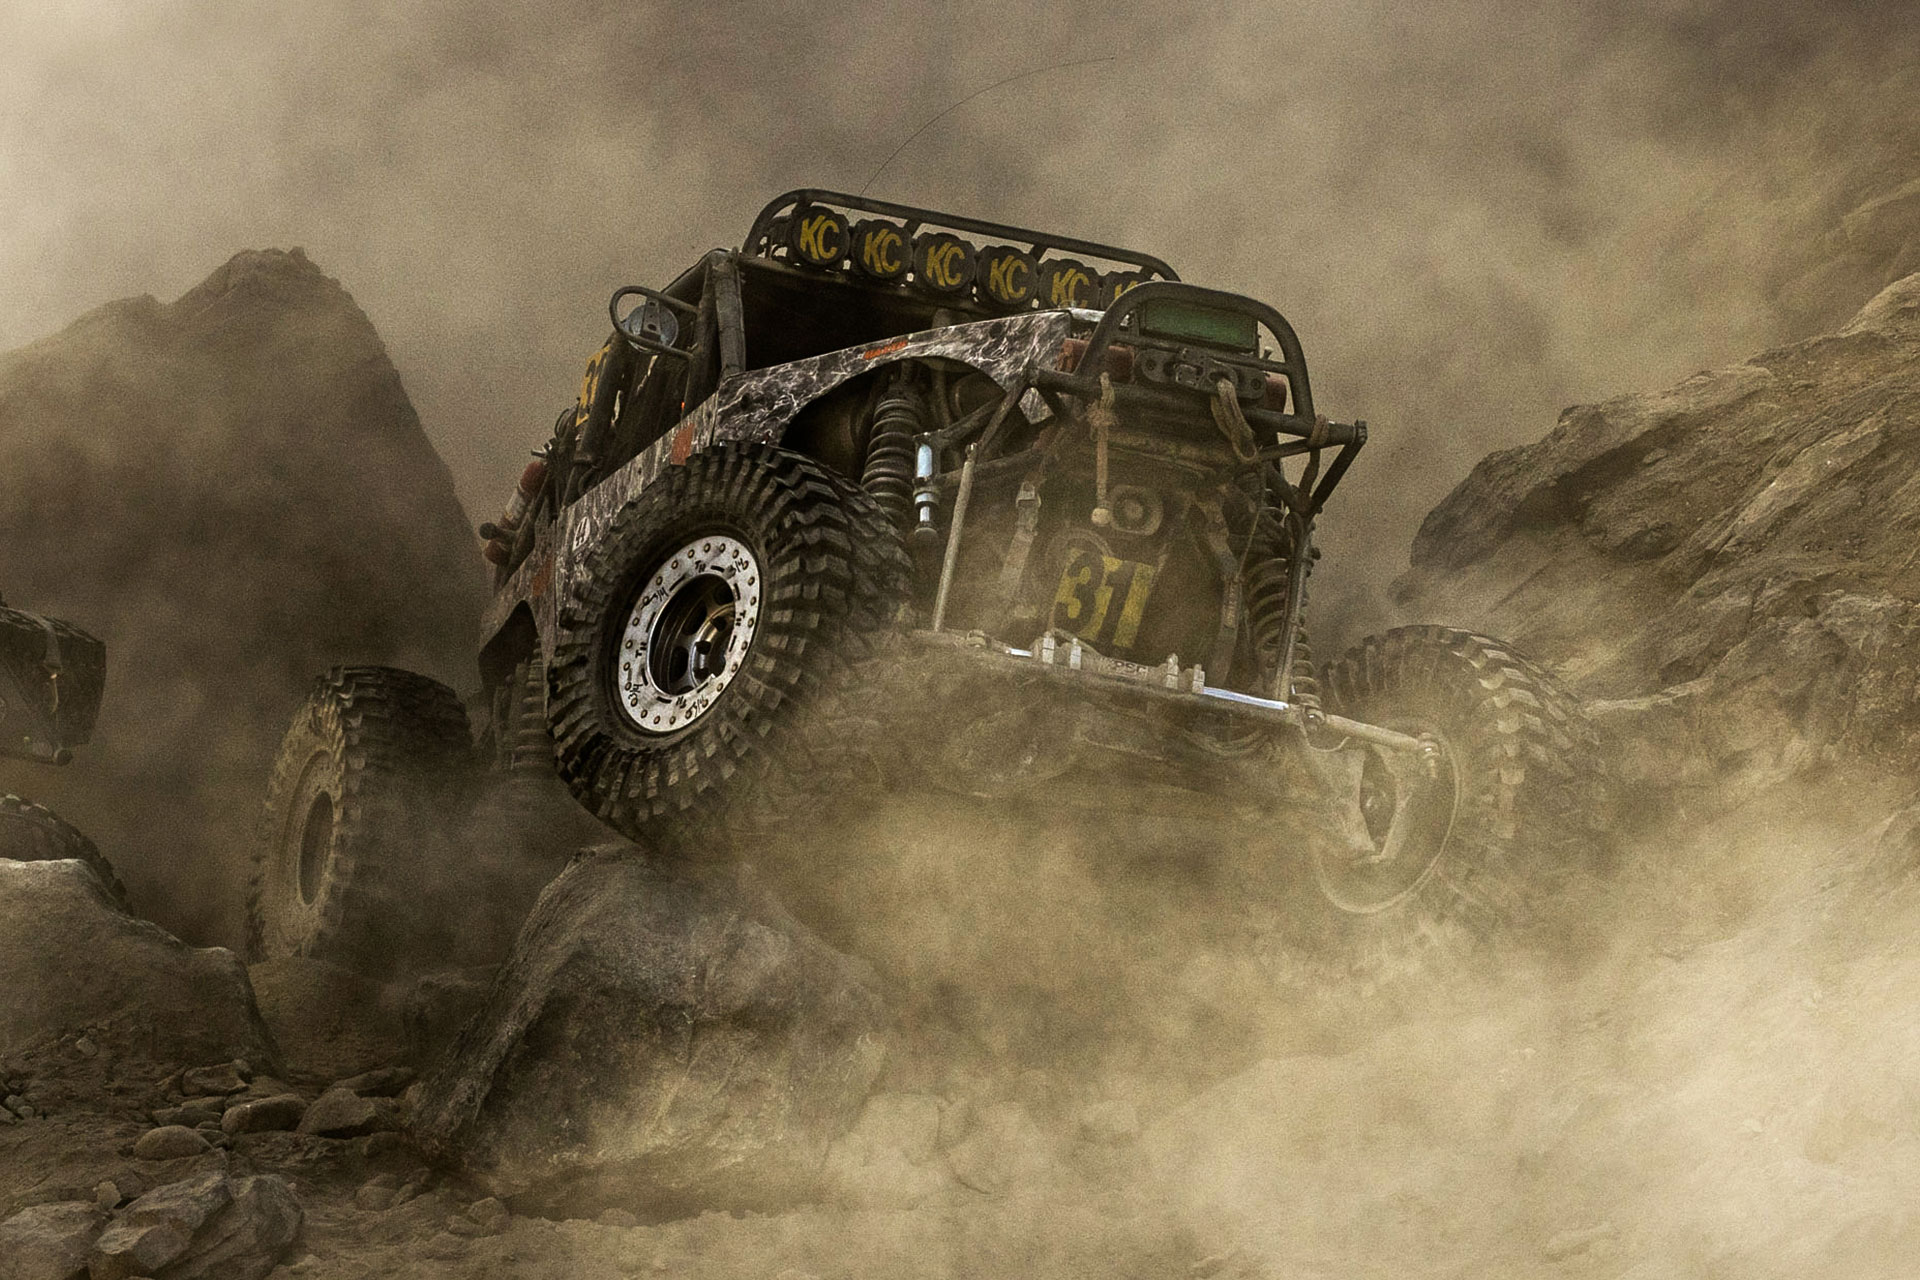 King of the Hammers Ultra4 Racing Competition vehicle on MAXXIS M8060 Trepador Tires